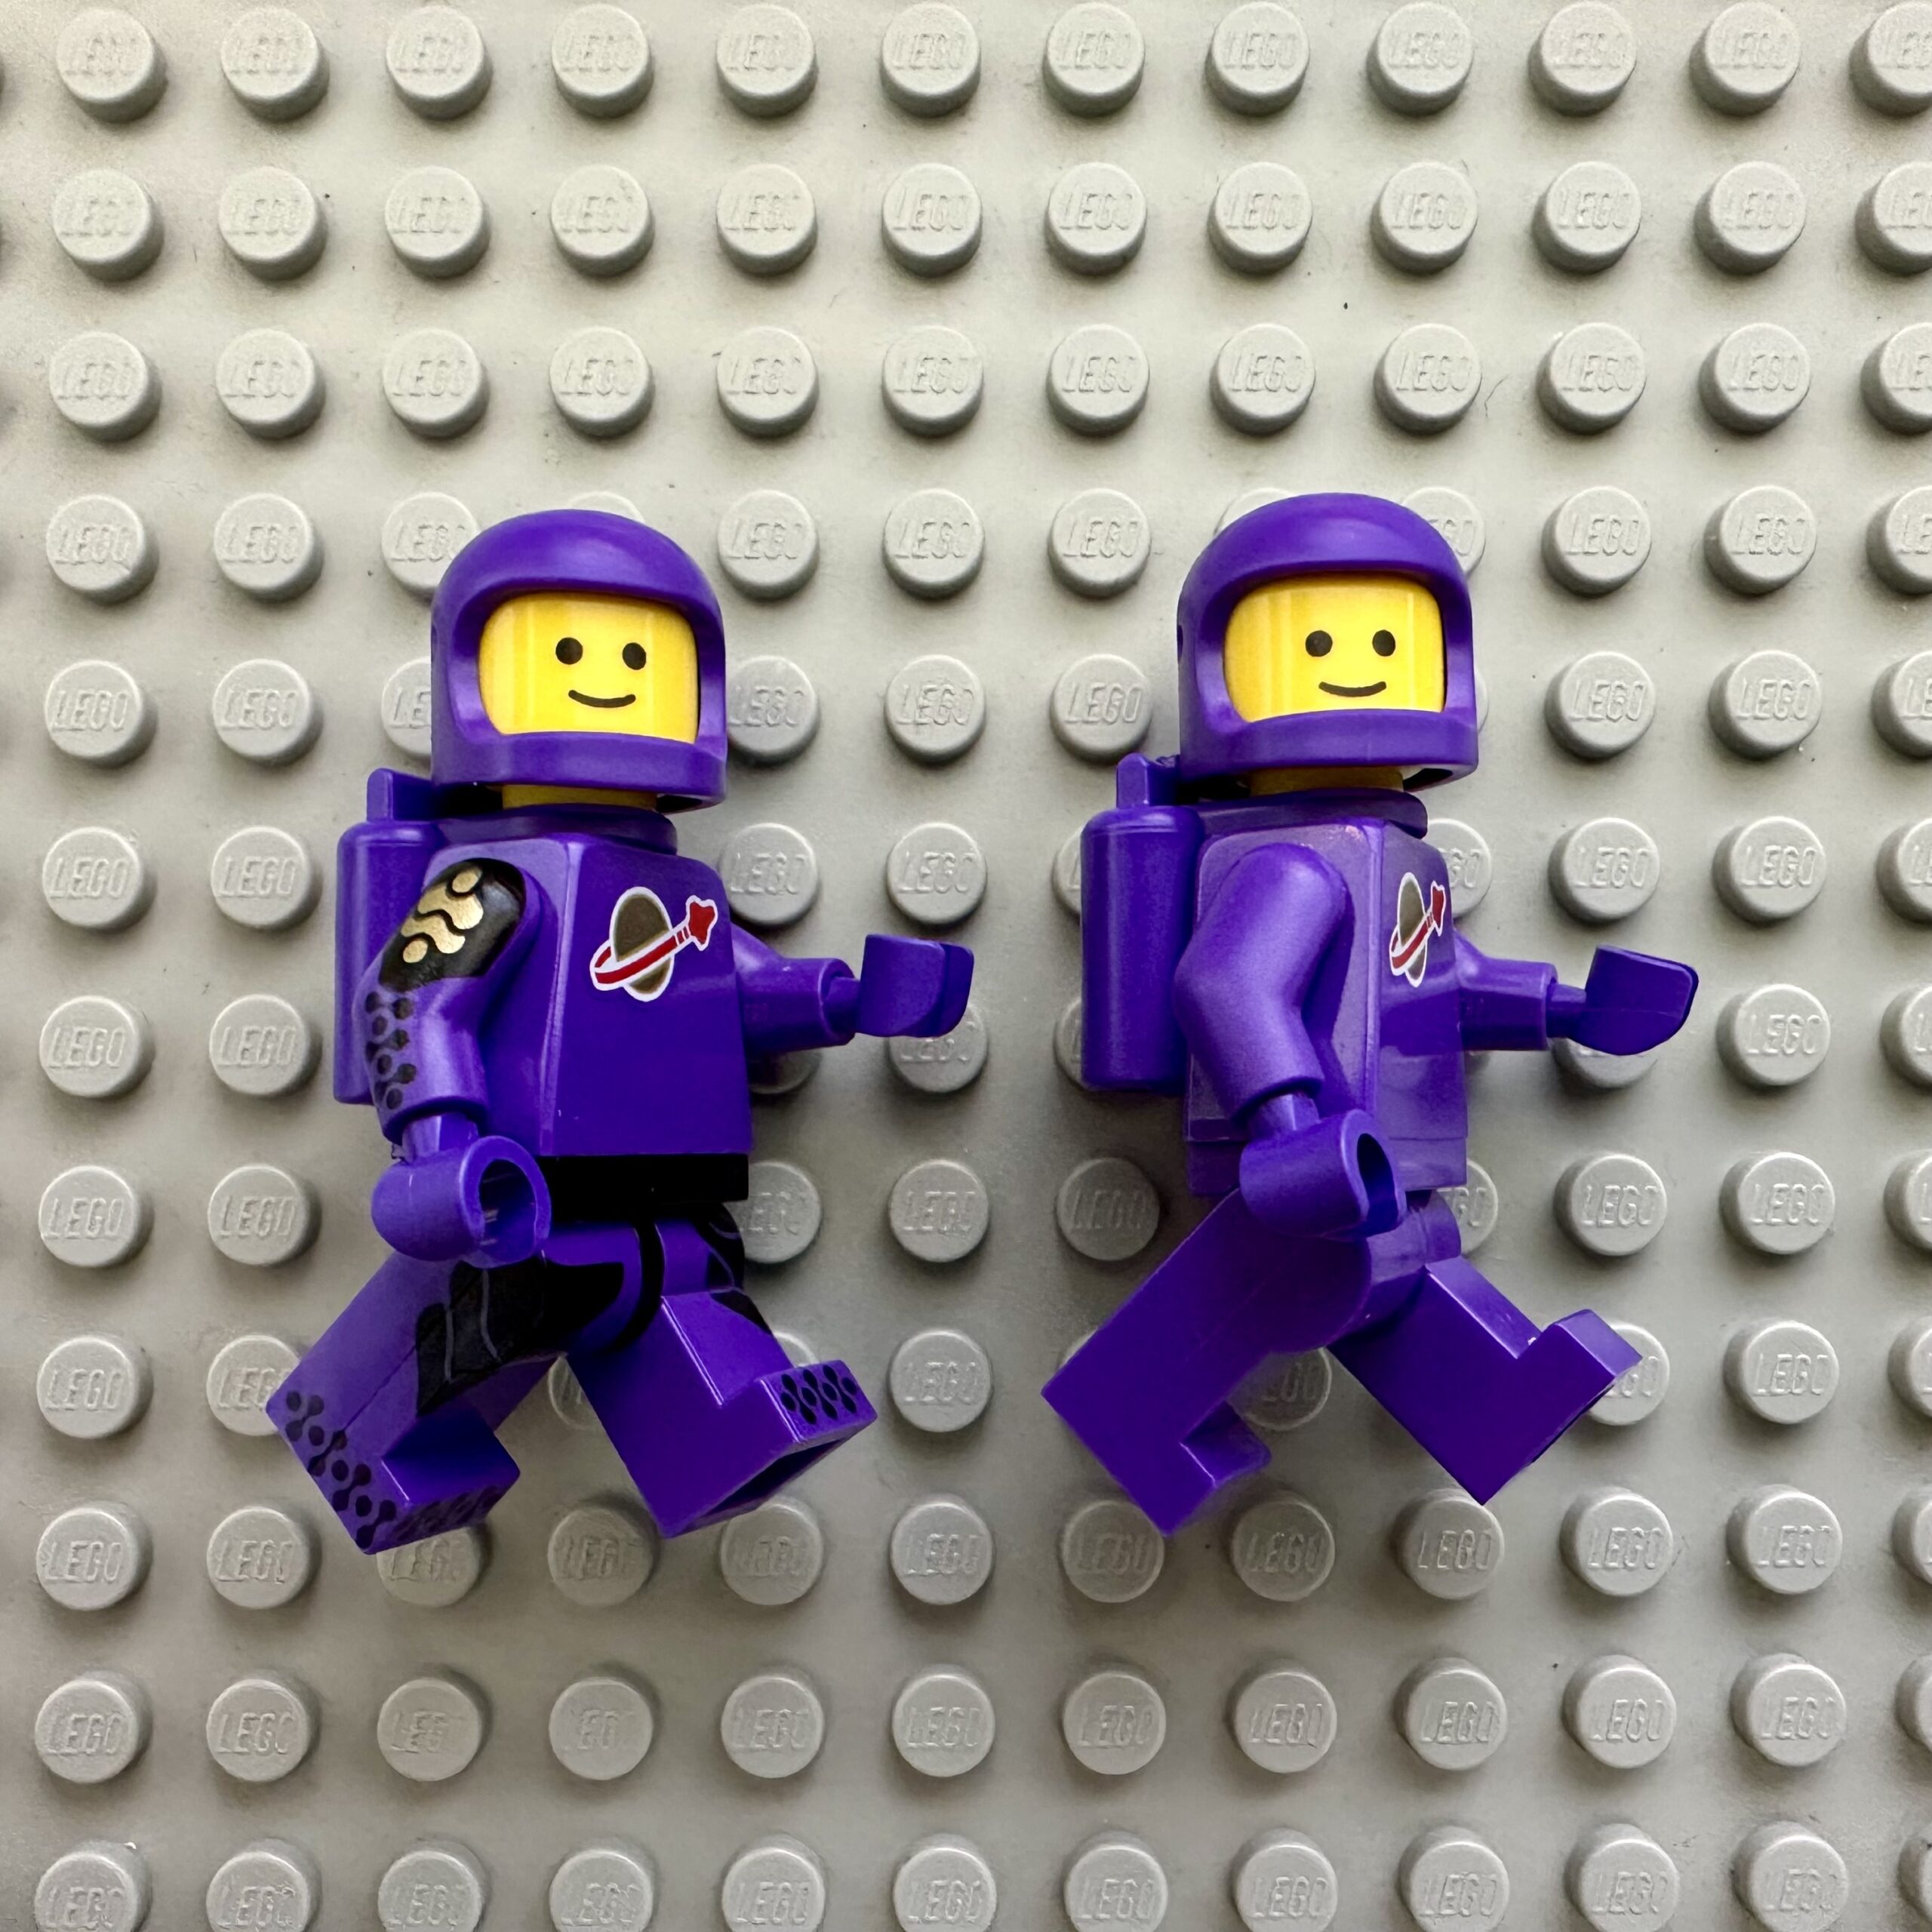 Two purple LEGO astronaut minifigs. The left figure has printed markings on its arms and legs while the right figure is plain.